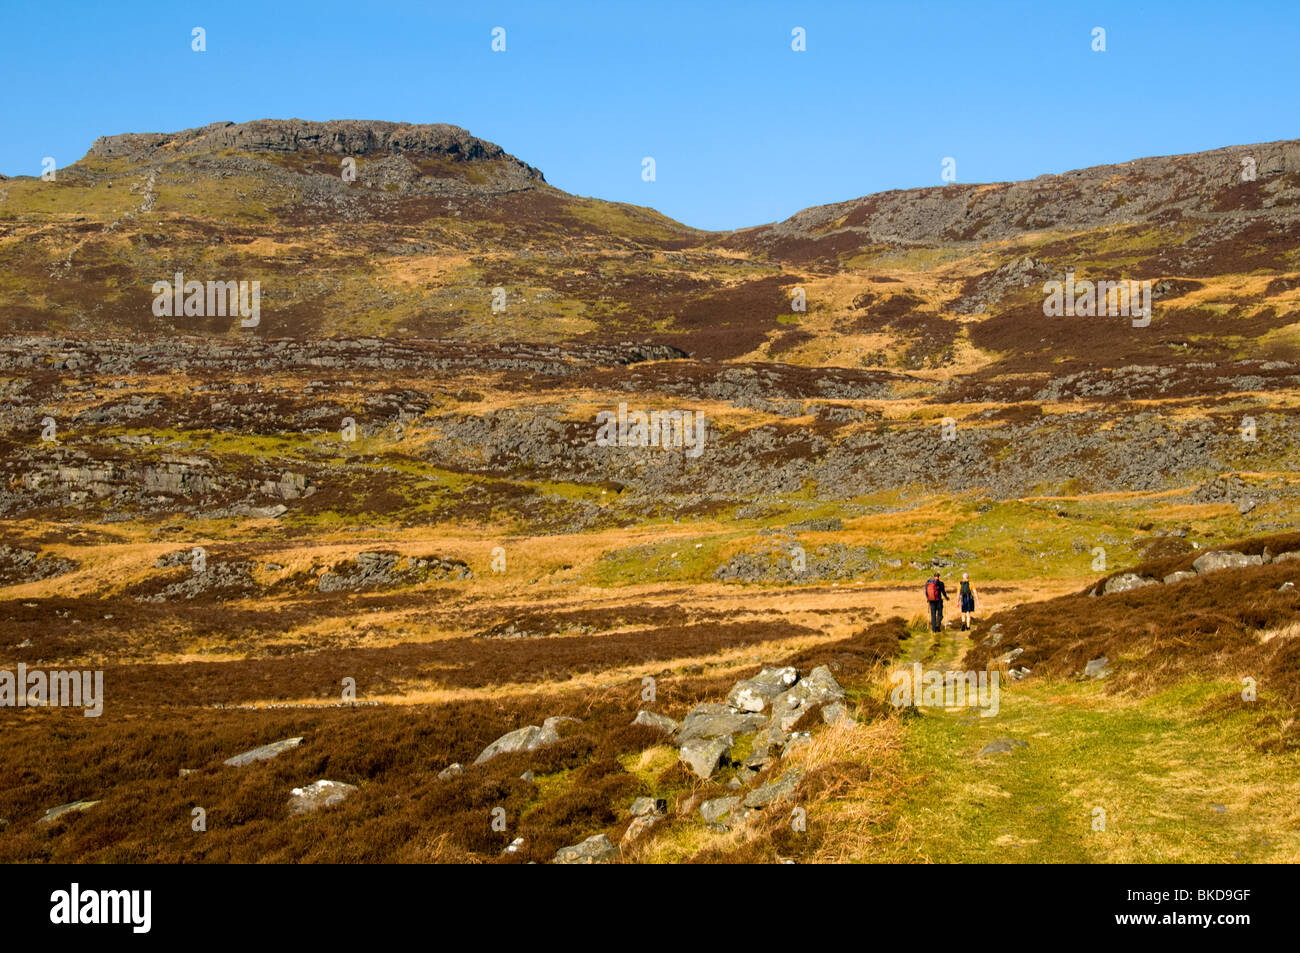 Foel Renolau in the north of the Rhinog Mountains, Snowdonia, North Wales, UK Stock Photo